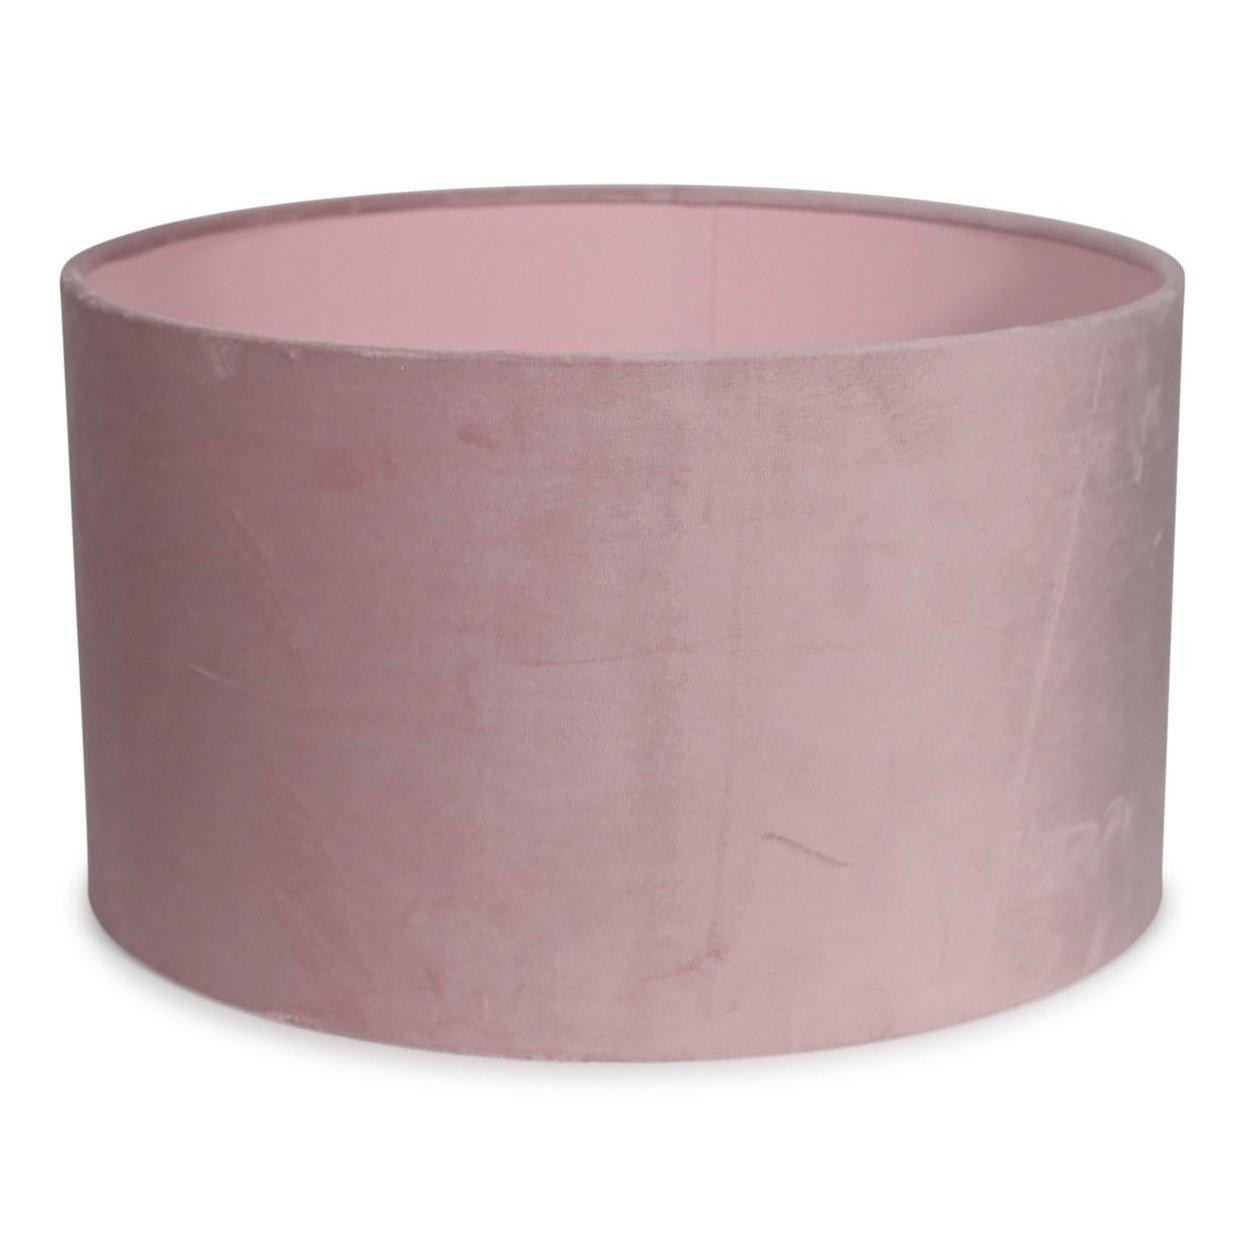 Velvet Large Ceiling Light Shade Lampshade Drum Pendant Easy Fit In Blush Pink - image 1